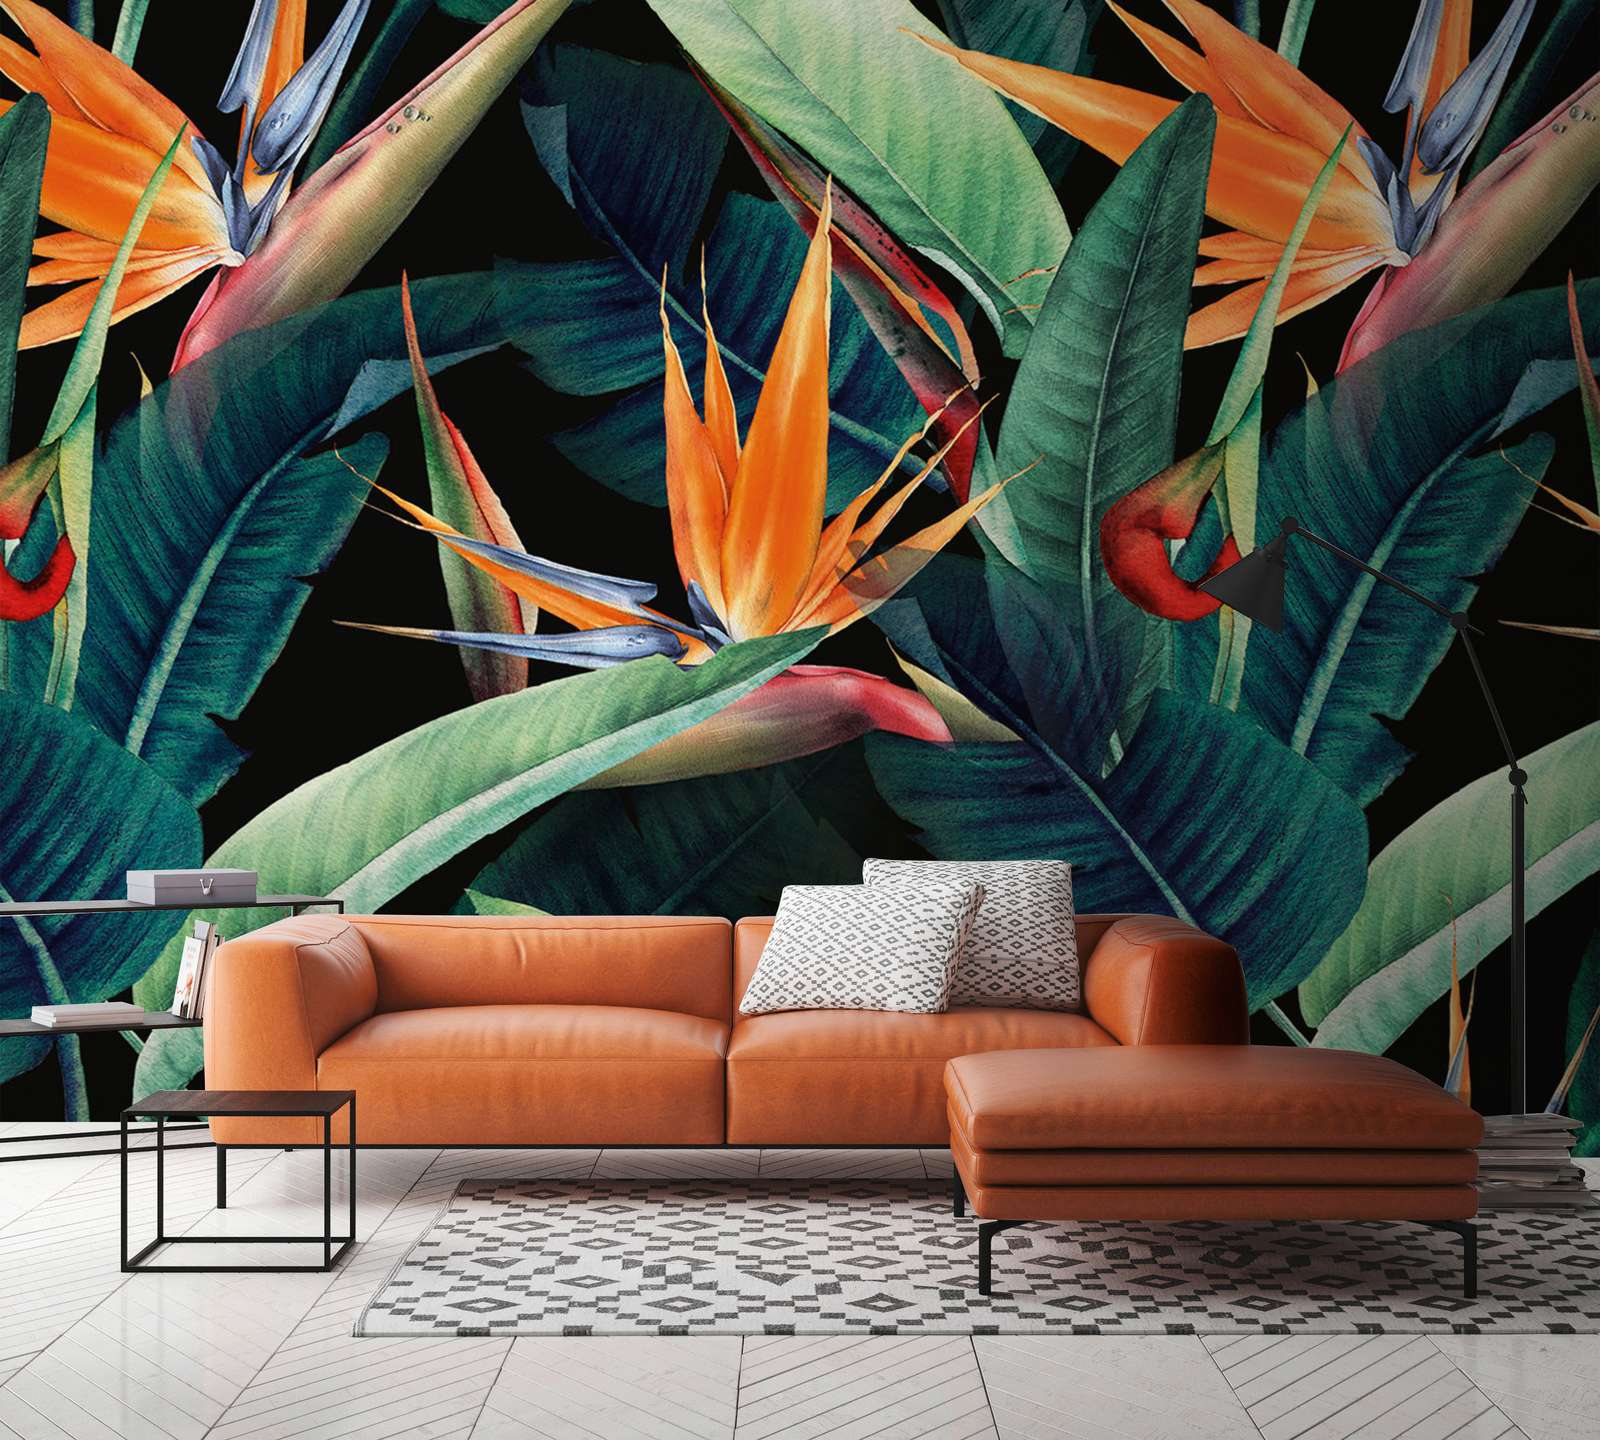             Photo wallpaper Jungle motif painted with leaves - Green, Orange, Colourful
        